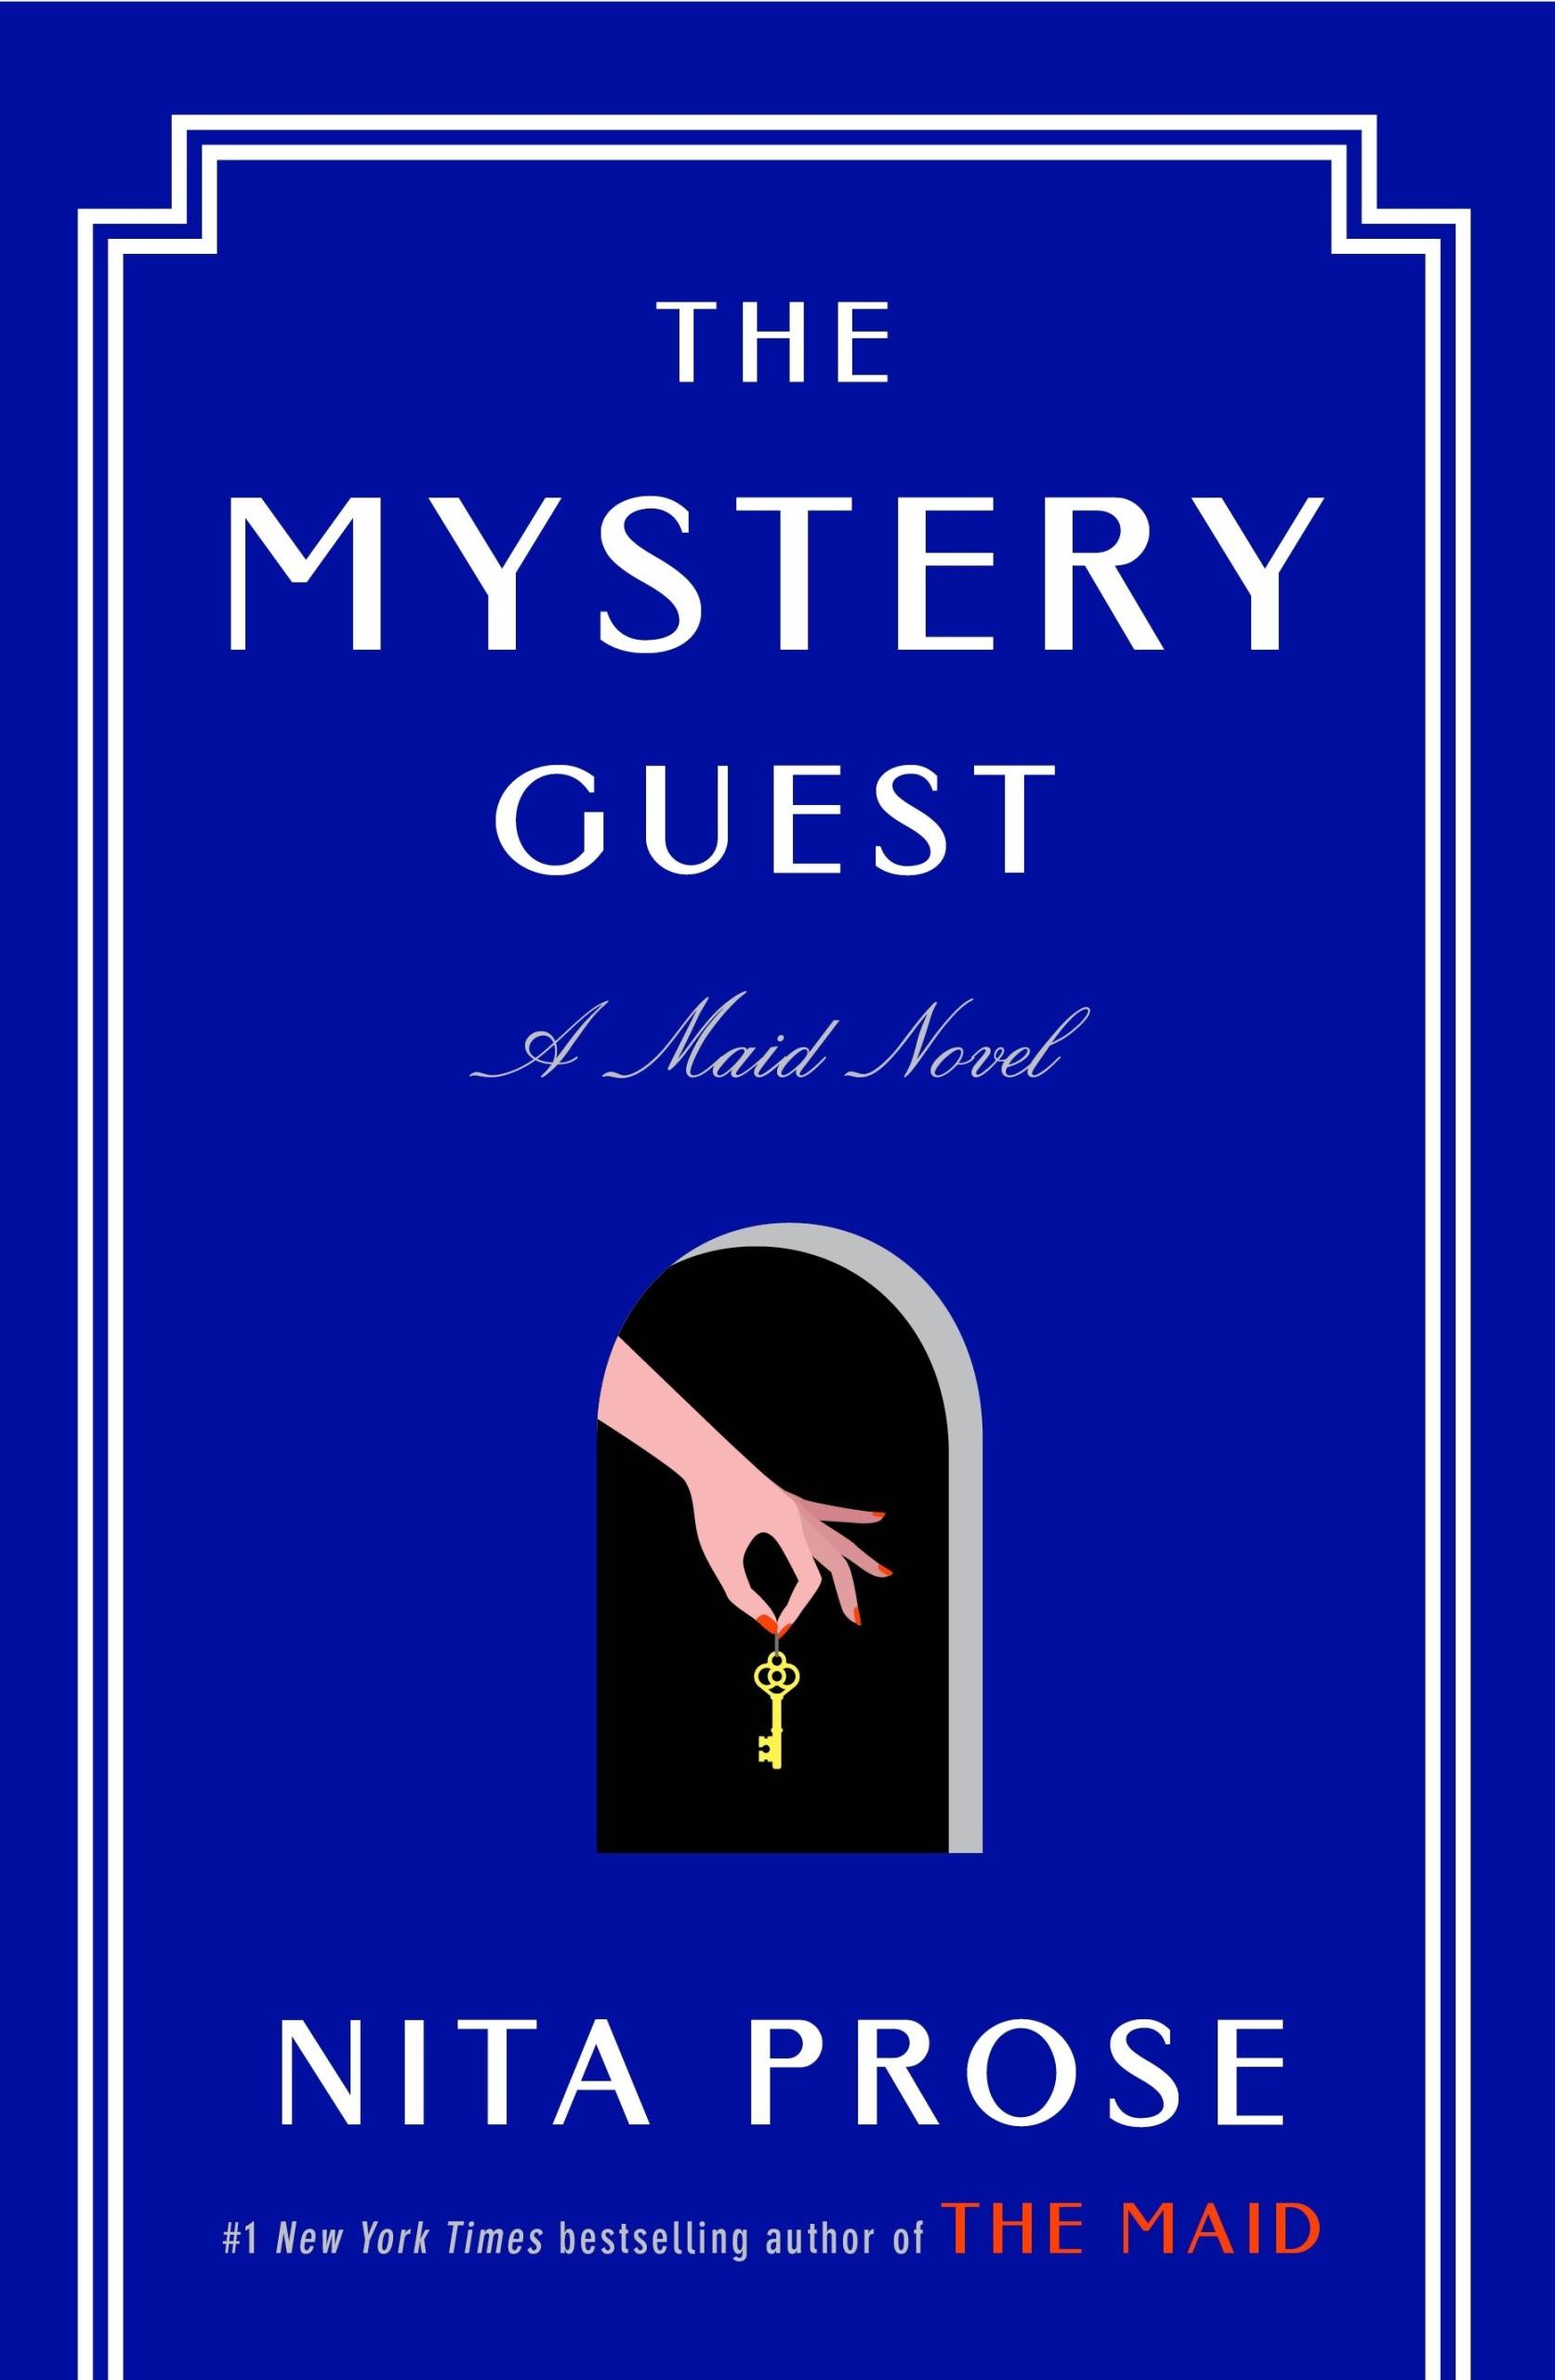 A blue cover featuring an illustrated hand moving through a doorway, clutching a dangling key.